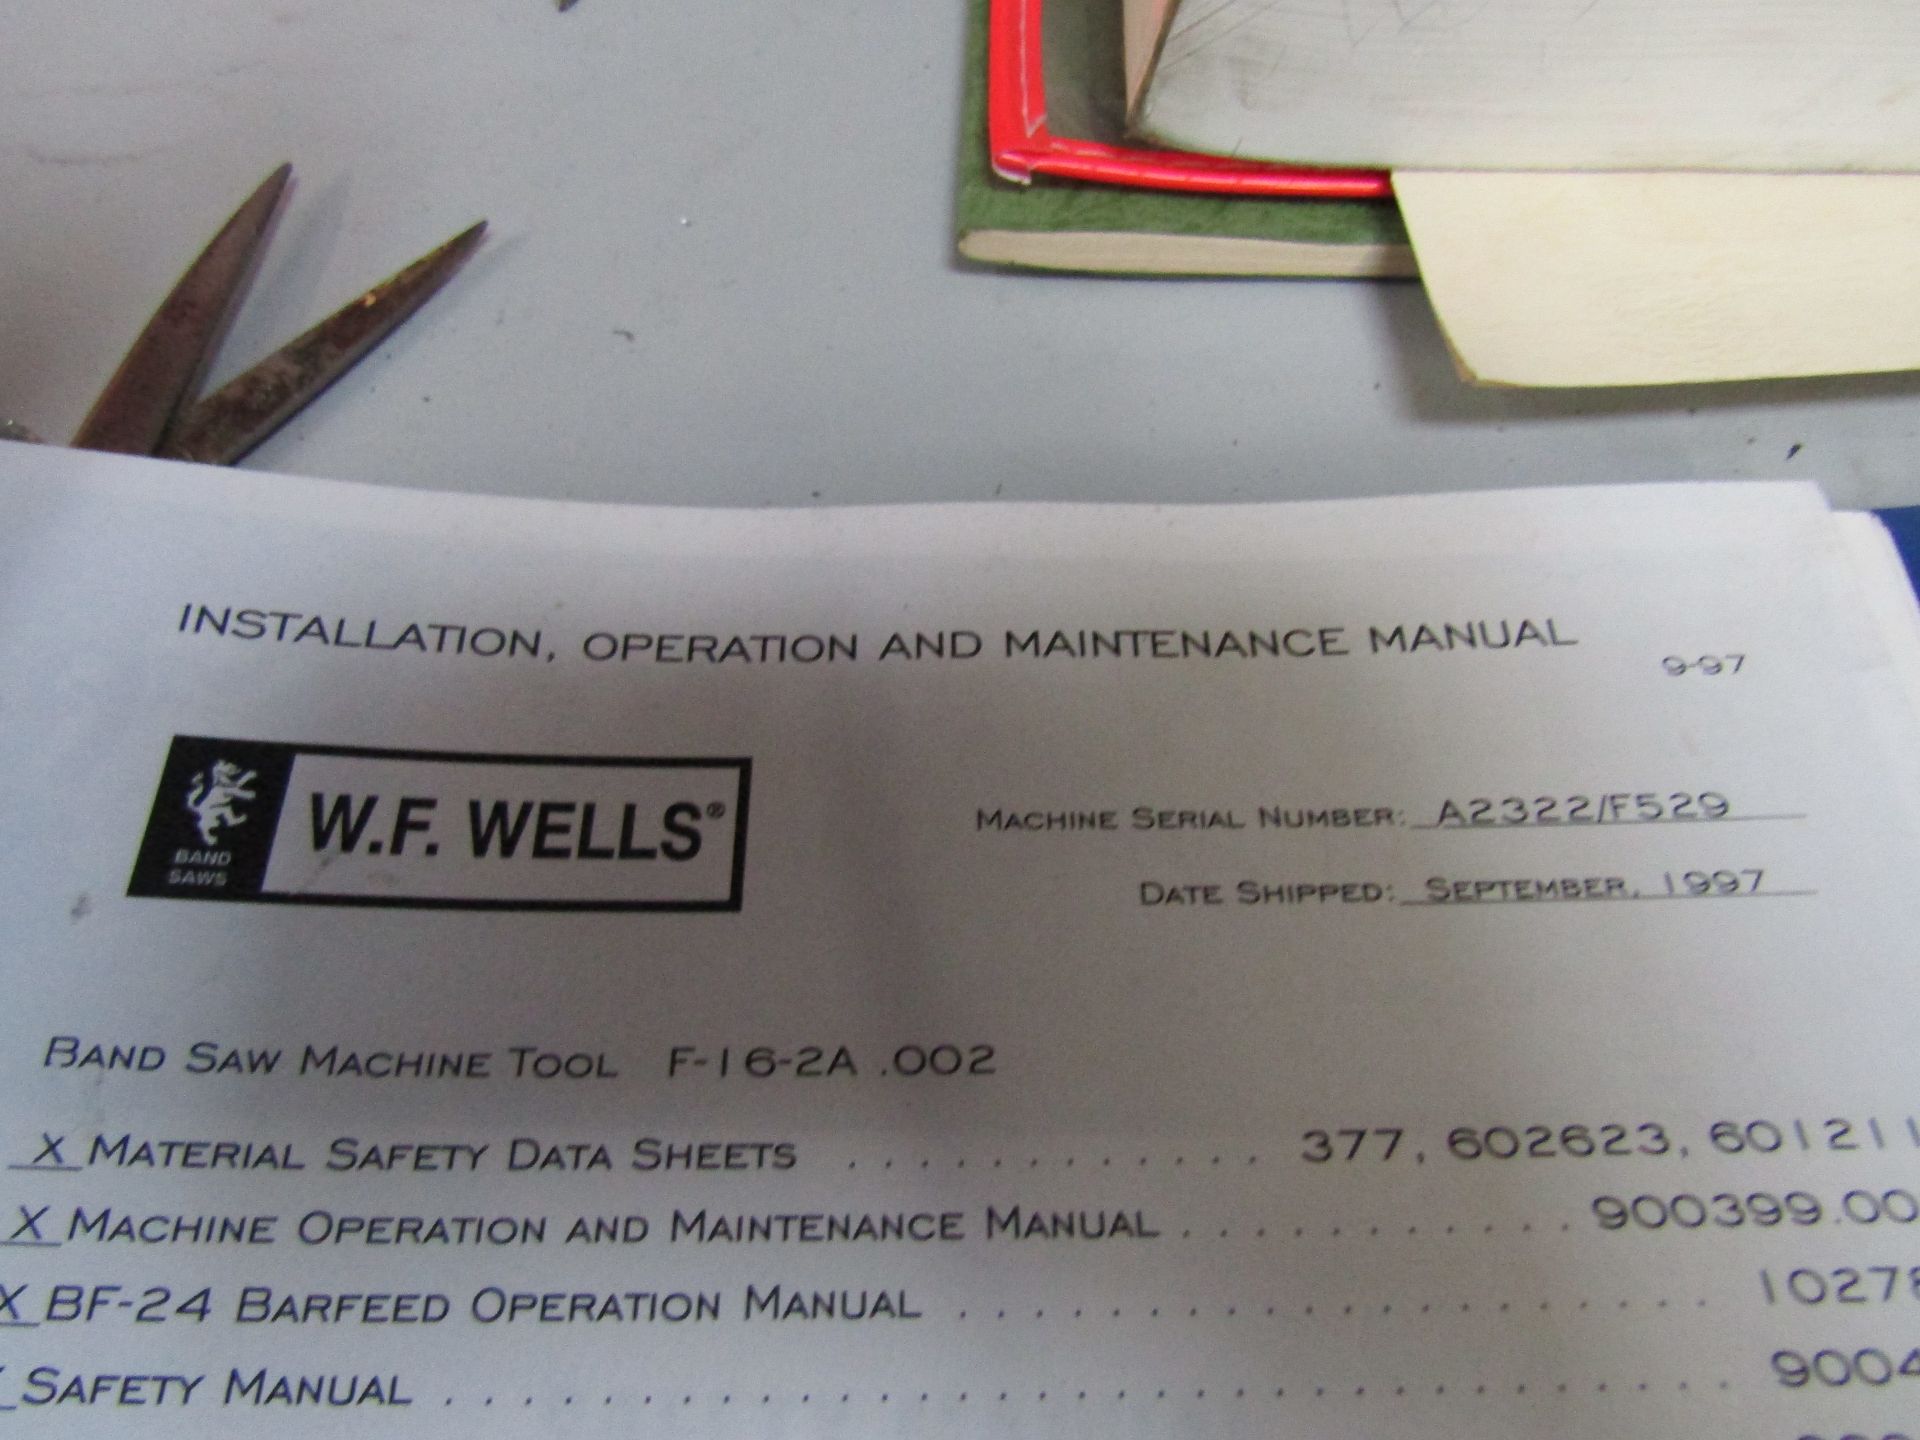 W.F. WELLS BAND SAW, SERIAL A2322/F529, MANUALS INCLUDED. - Image 7 of 7